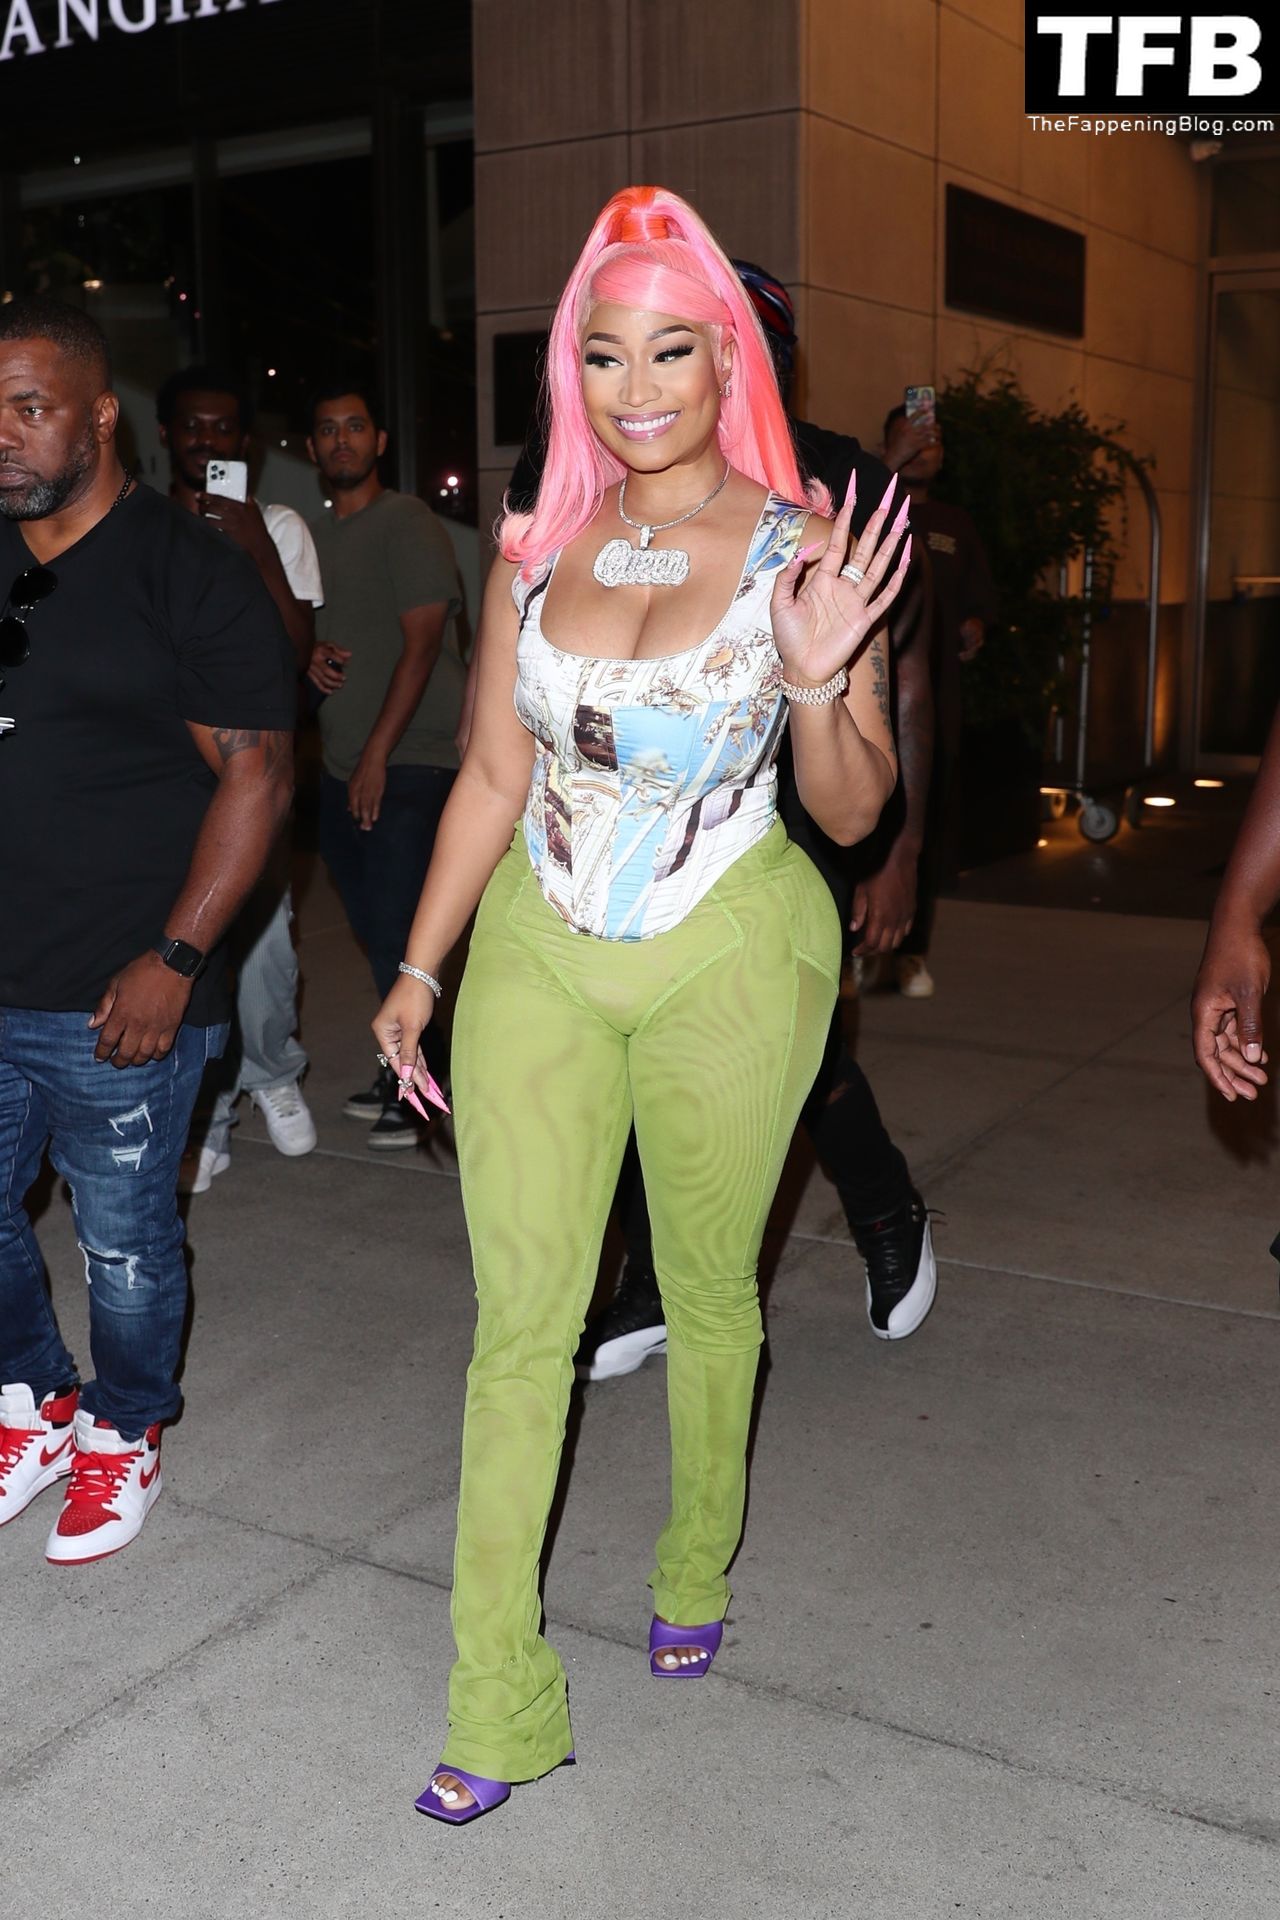 Nicki Minaj Sexy The Fappening Blog 23 - Nicki Minaj Checks Out of Her Hotel After Her Epic Night at the MTV VMA’s in NYC (38 Photos)